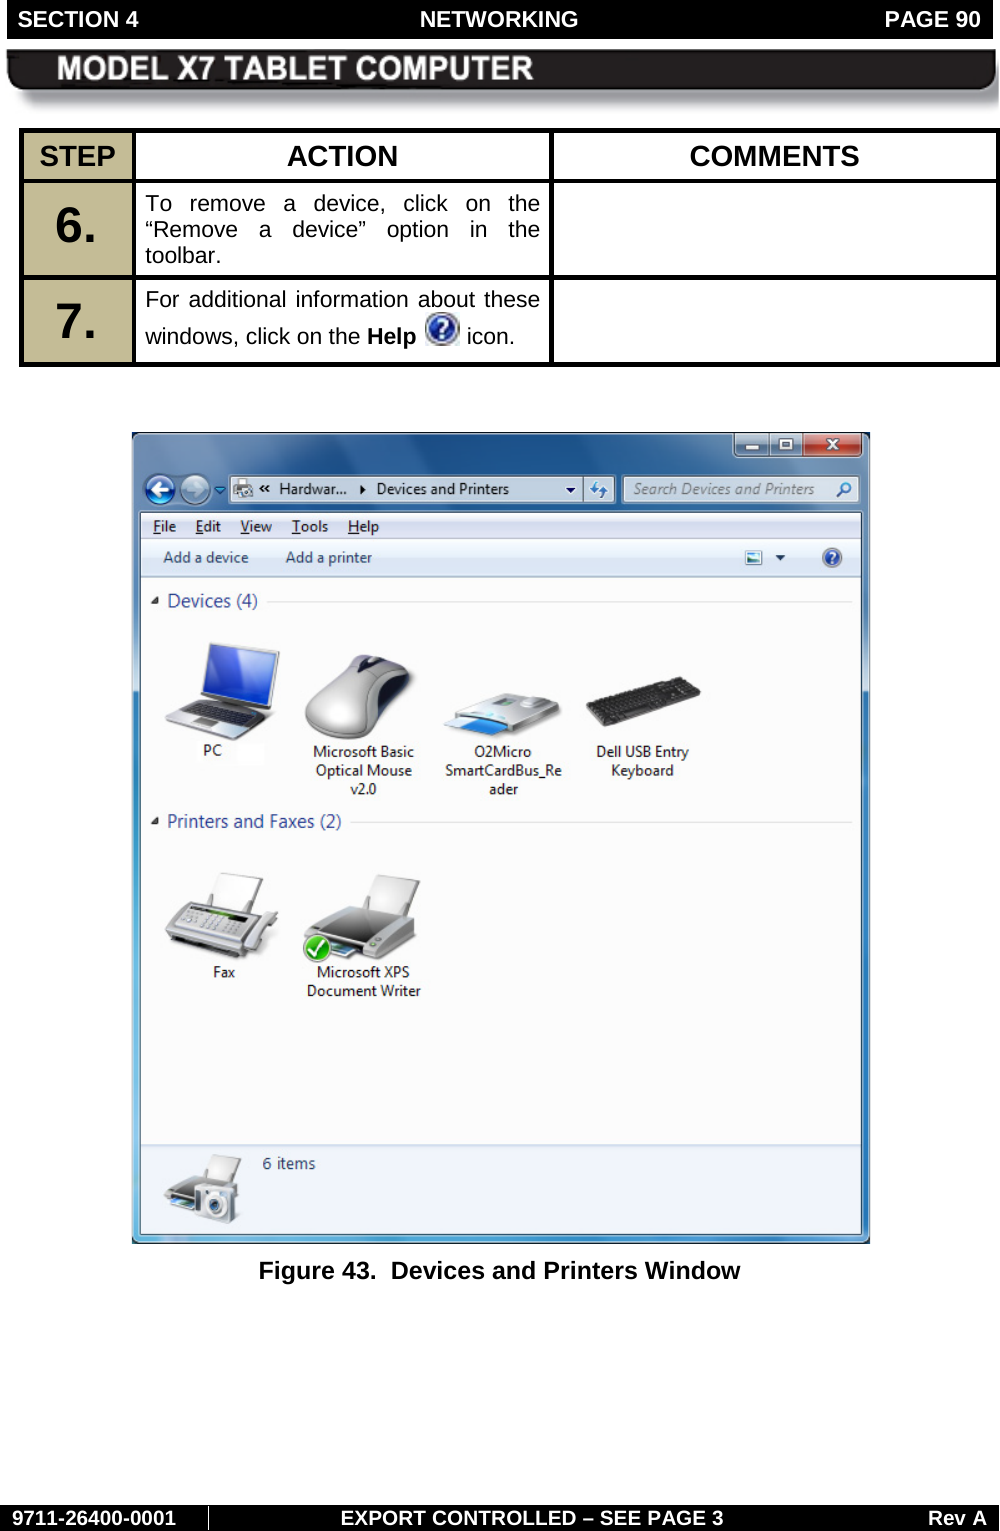 SECTION 4 NETWORKING  PAGE 90        9711-26400-0001 EXPORT CONTROLLED – SEE PAGE 3 Rev A STEP  ACTION COMMENTS 6.  To remove a device, click on the “Remove a device” option in the toolbar.  7.   For additional information about these windows, click on the Help   icon.     Figure 43.  Devices and Printers Window  